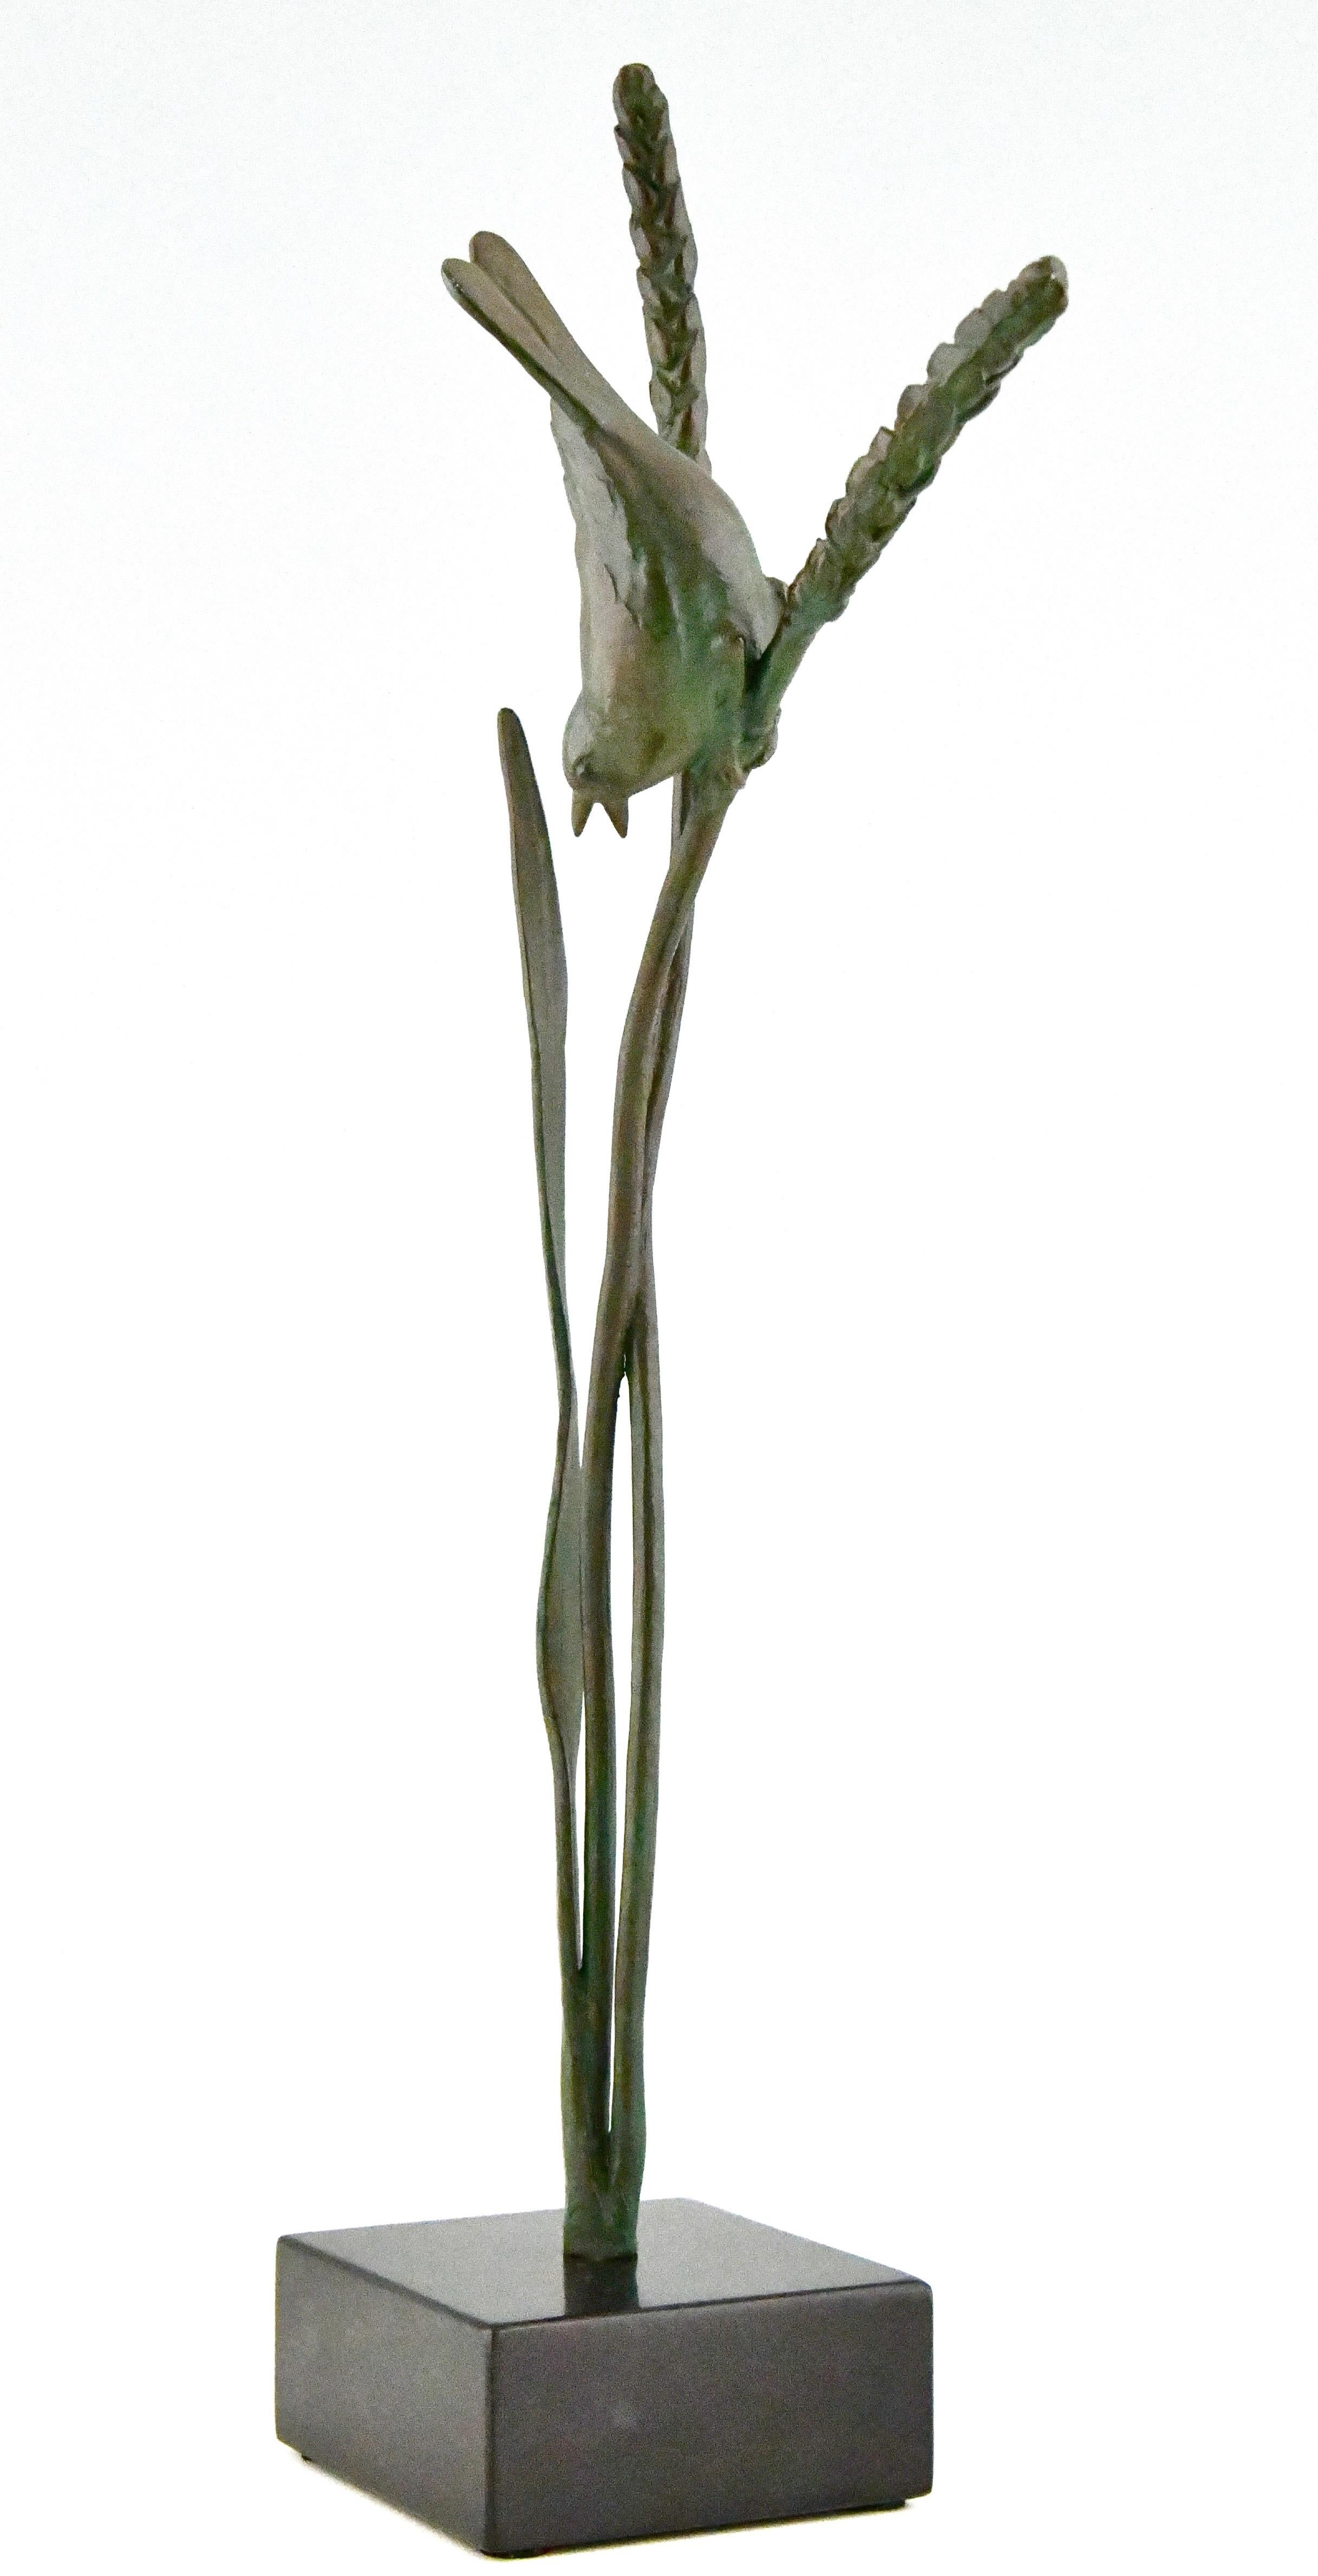 French Art Deco bronze sculpture of a bird on a wheat stalk by Chattel, France 1930 For Sale